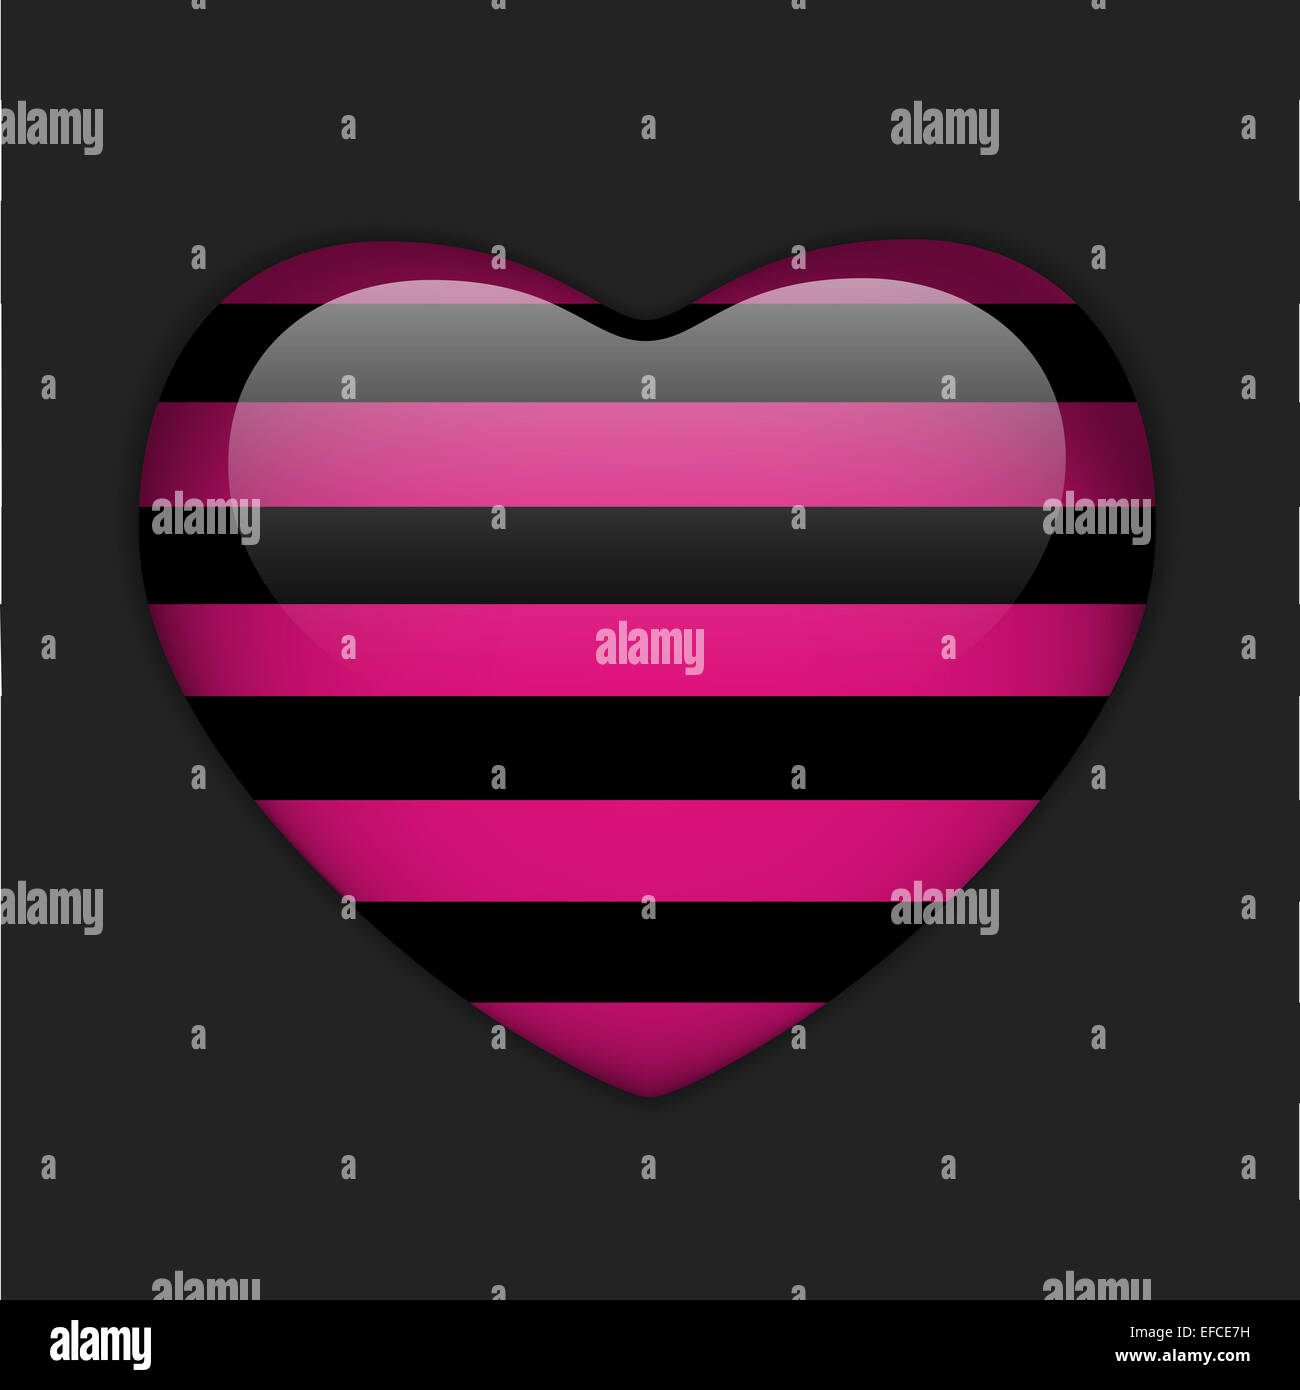 Vector - Glossy Emo Heart. Pink and Black Stripes Stock Photo